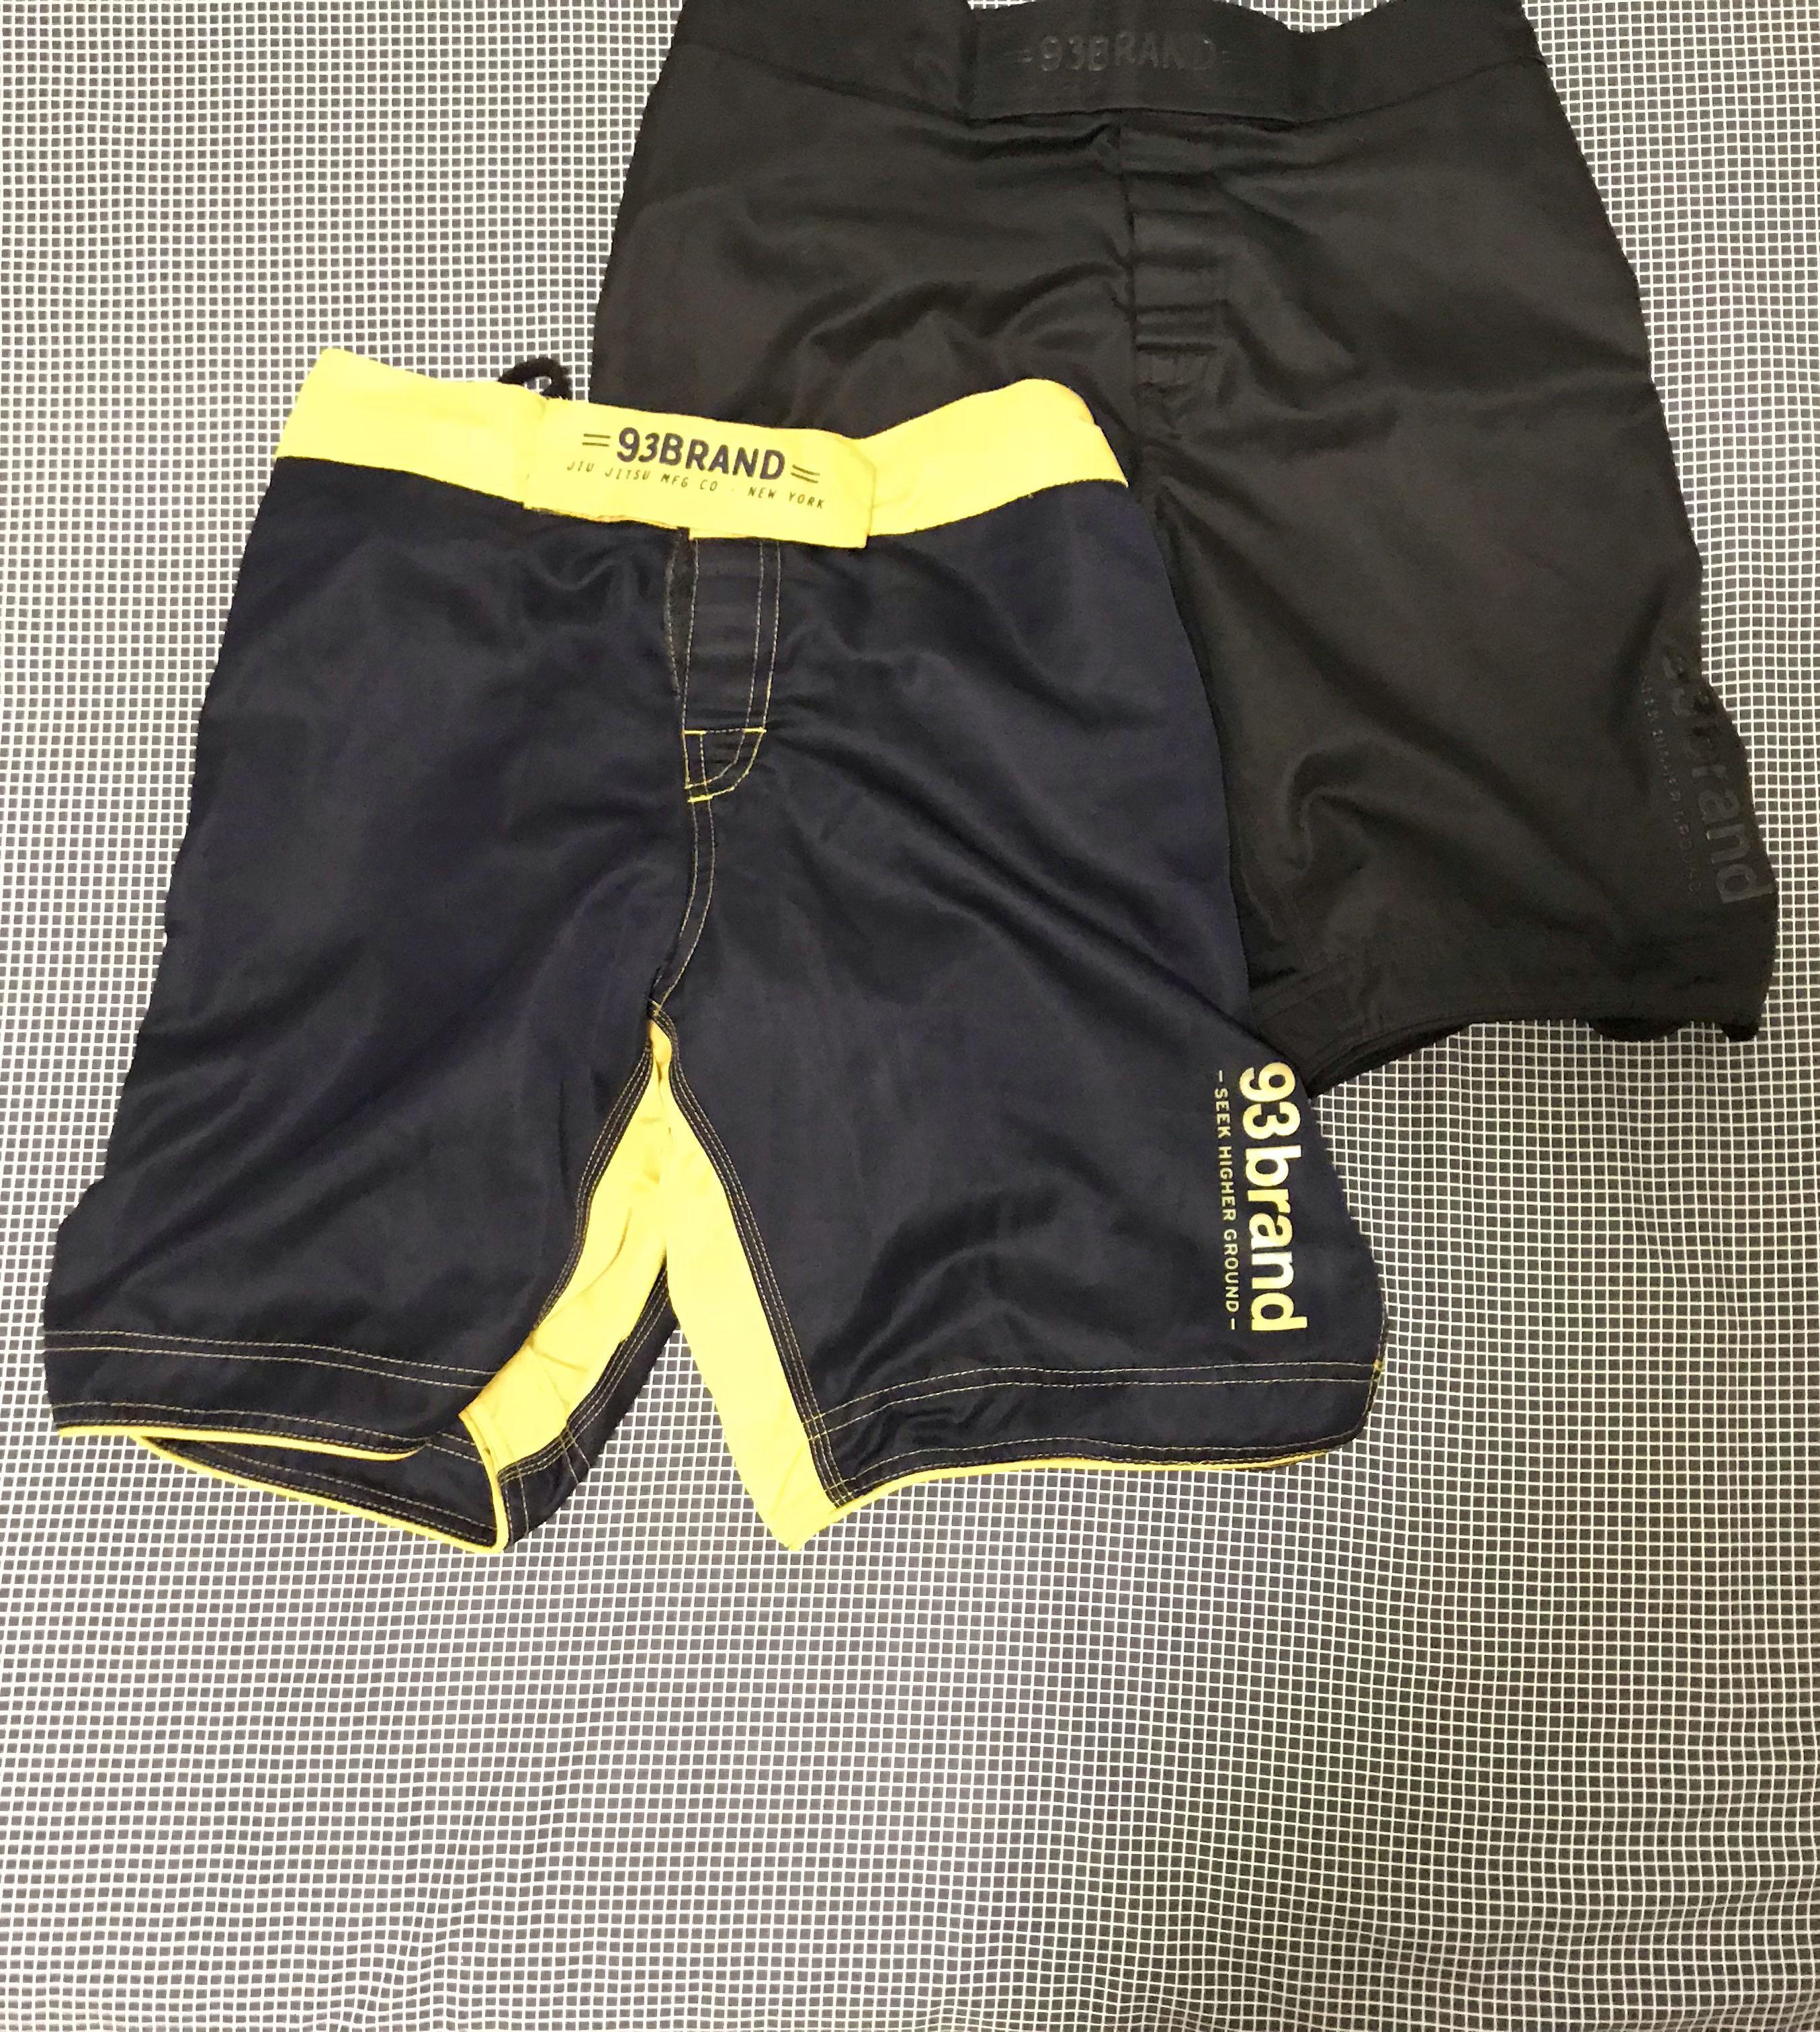 under armour grappling shorts